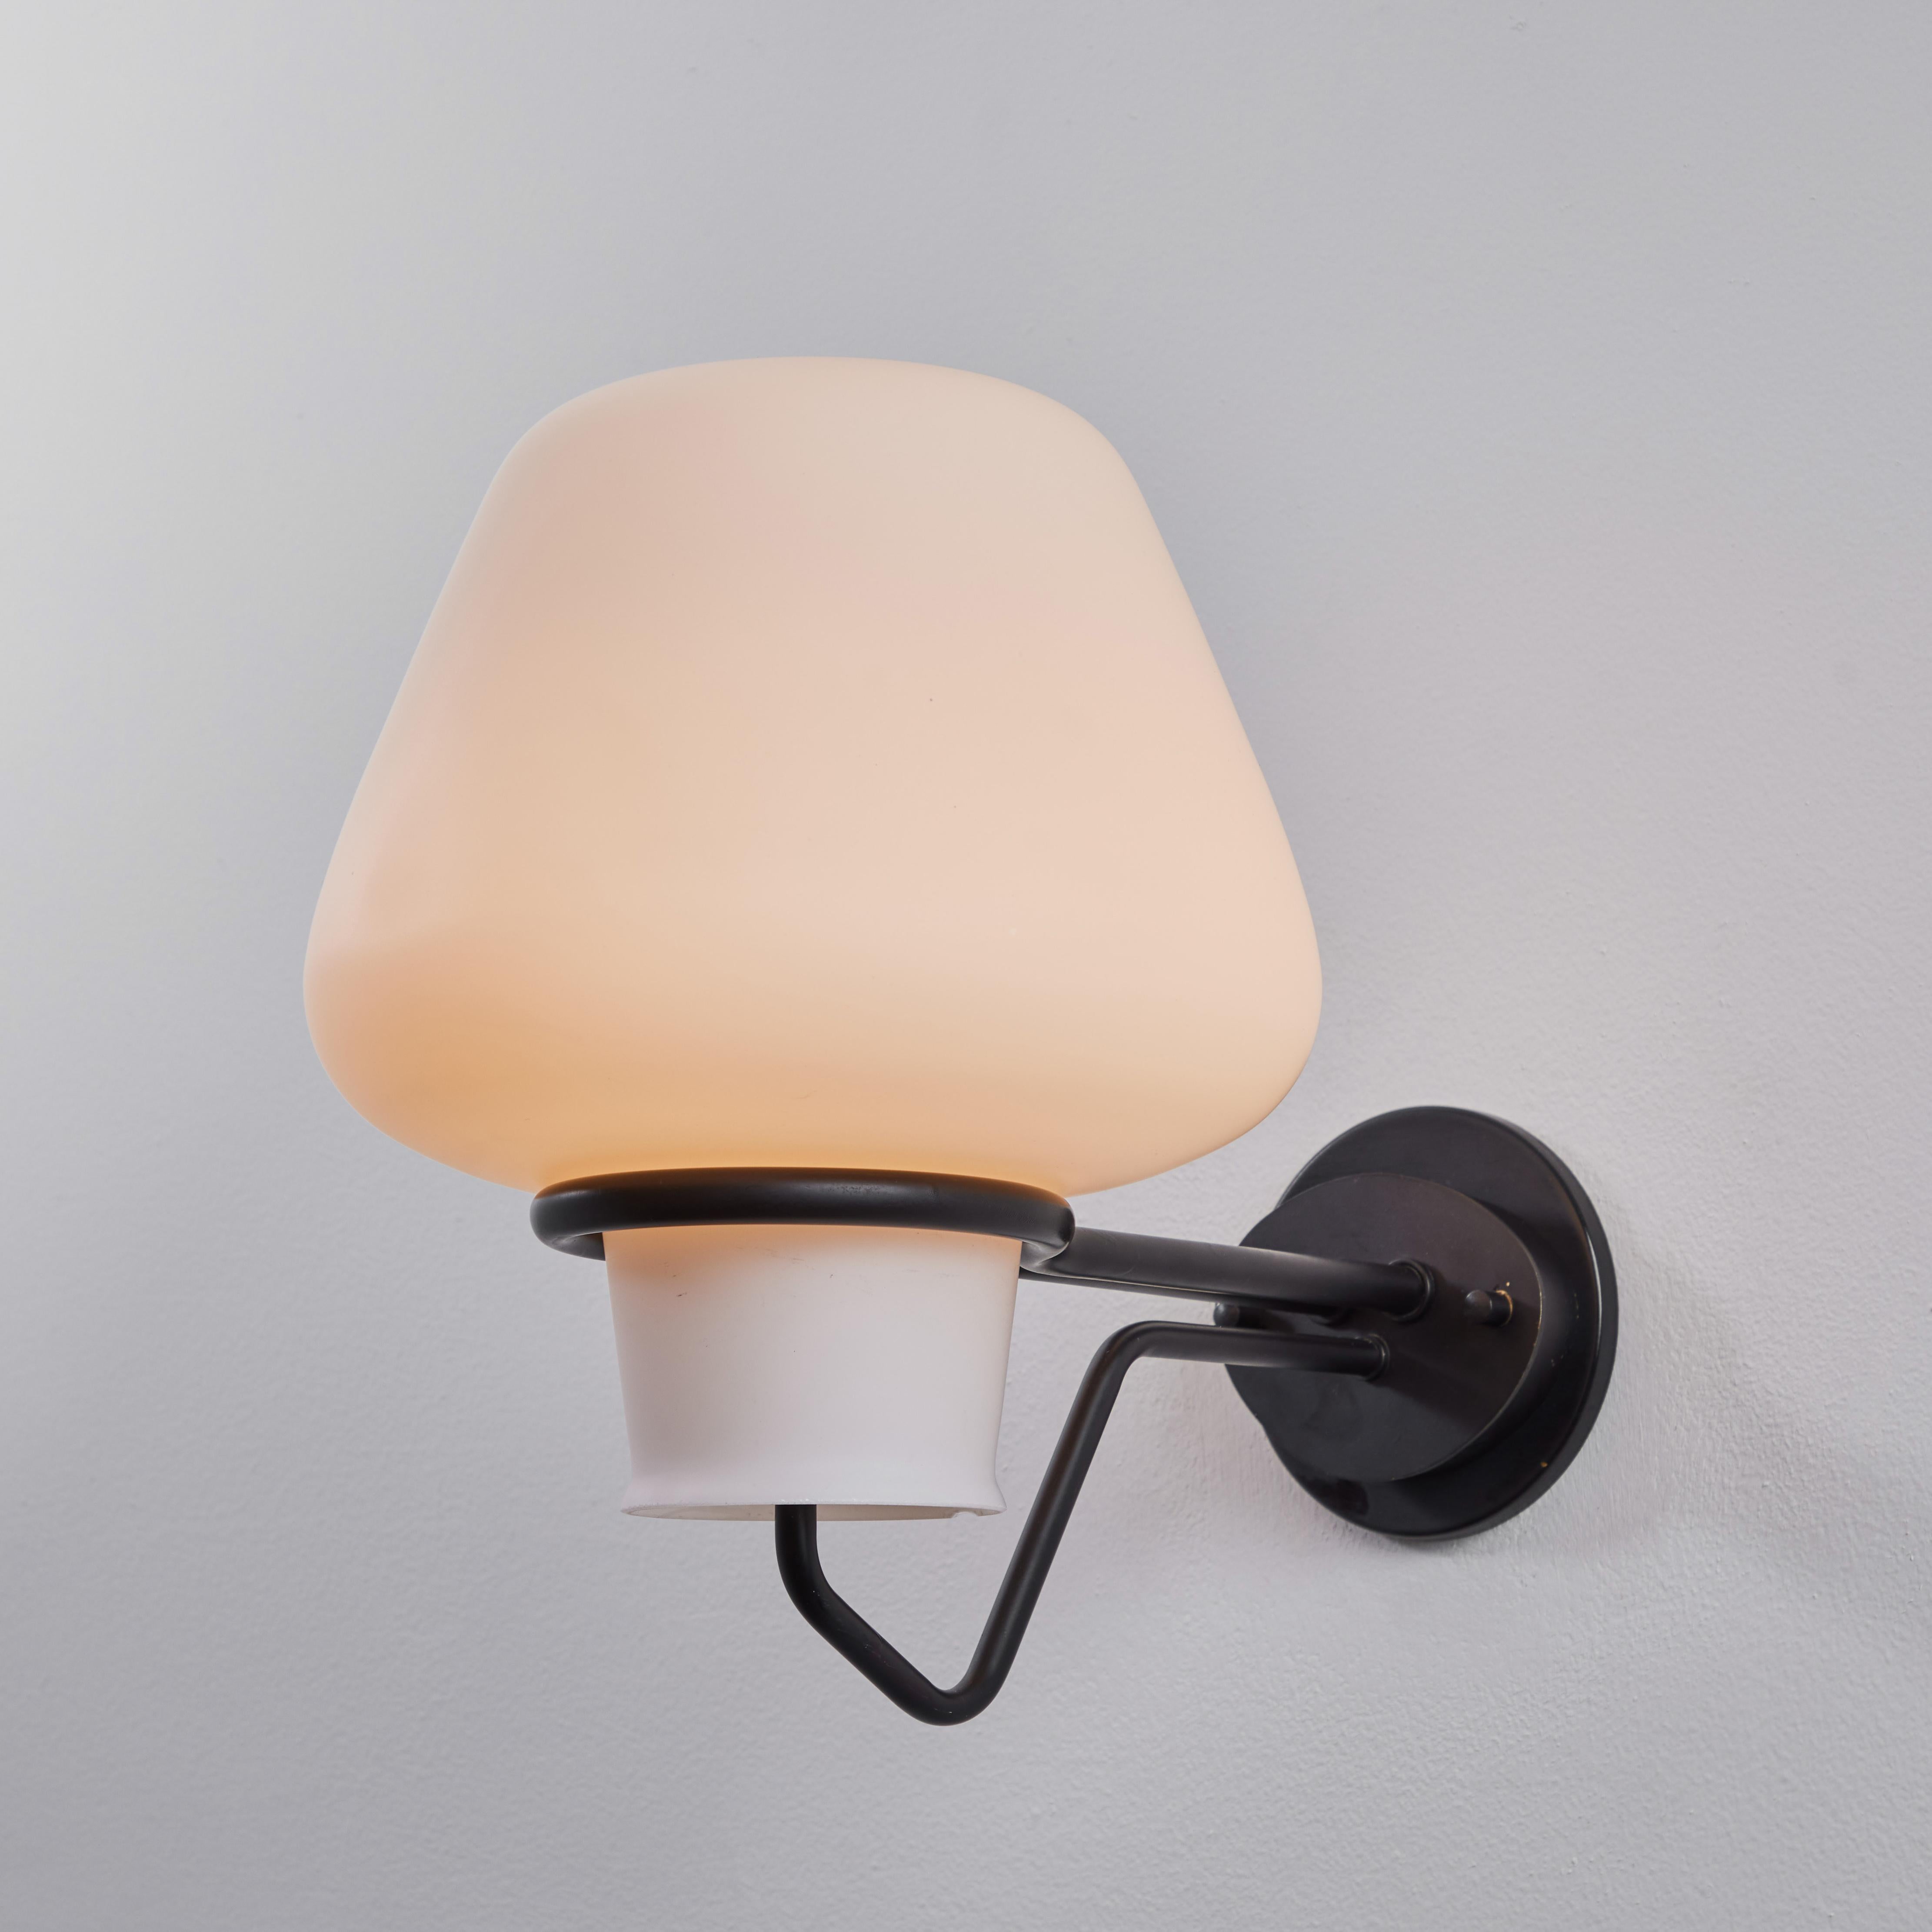 Large 1950s Gunnar Asplund JH-813 metal and glass sconce for ASEA. Executed in black painted and opaline glass with custom period style backplate added for mounting over a standard American j-box. A lyrical and elegant Scandinavian modern design